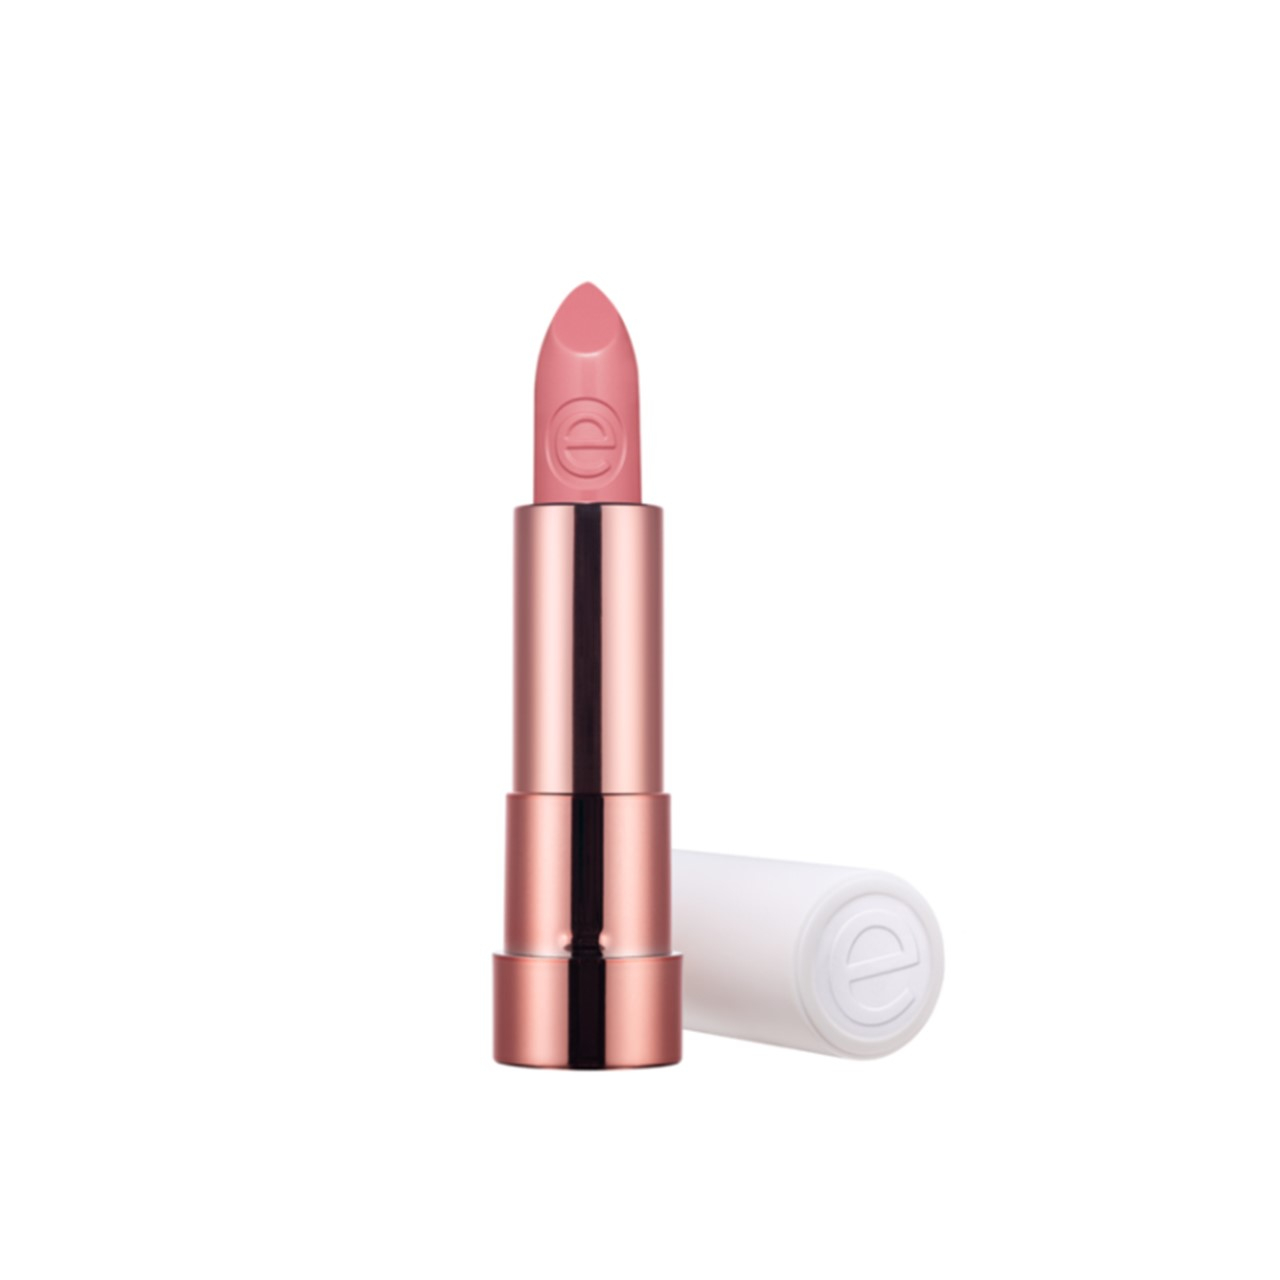 essence This Is Me. Lipstick 25 Lovely 3.5g (0.12oz)